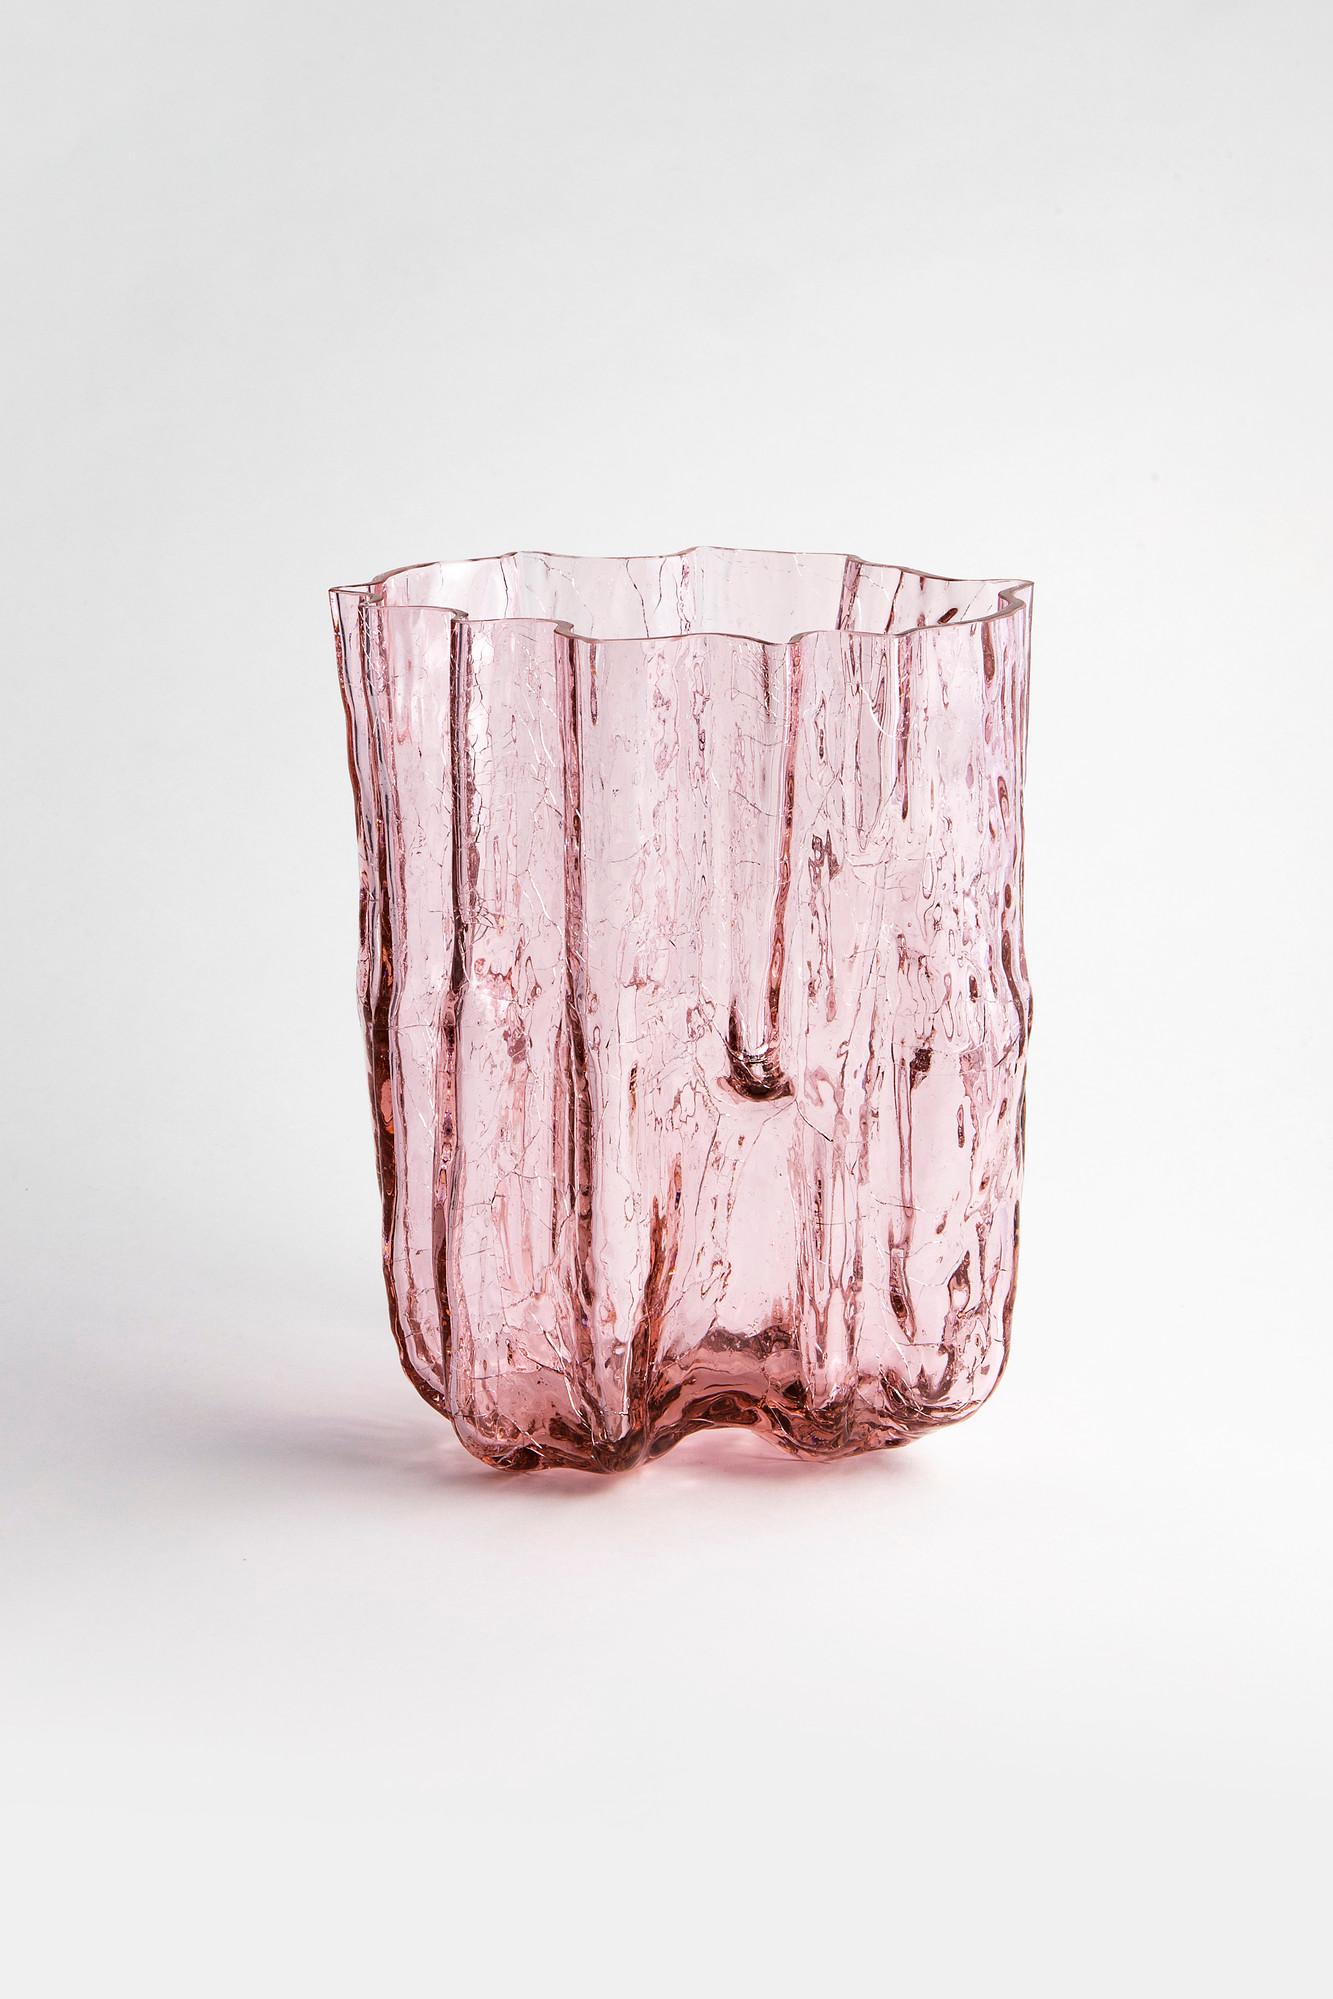 Crackle and thunder – a magical wonder! At Kosta Boda, we marvel at beautifully preserved cracks in glass. The pink vase from the Crackle collection has an expressive, sculptural exterior created using an old handicraft technique where the hot glass